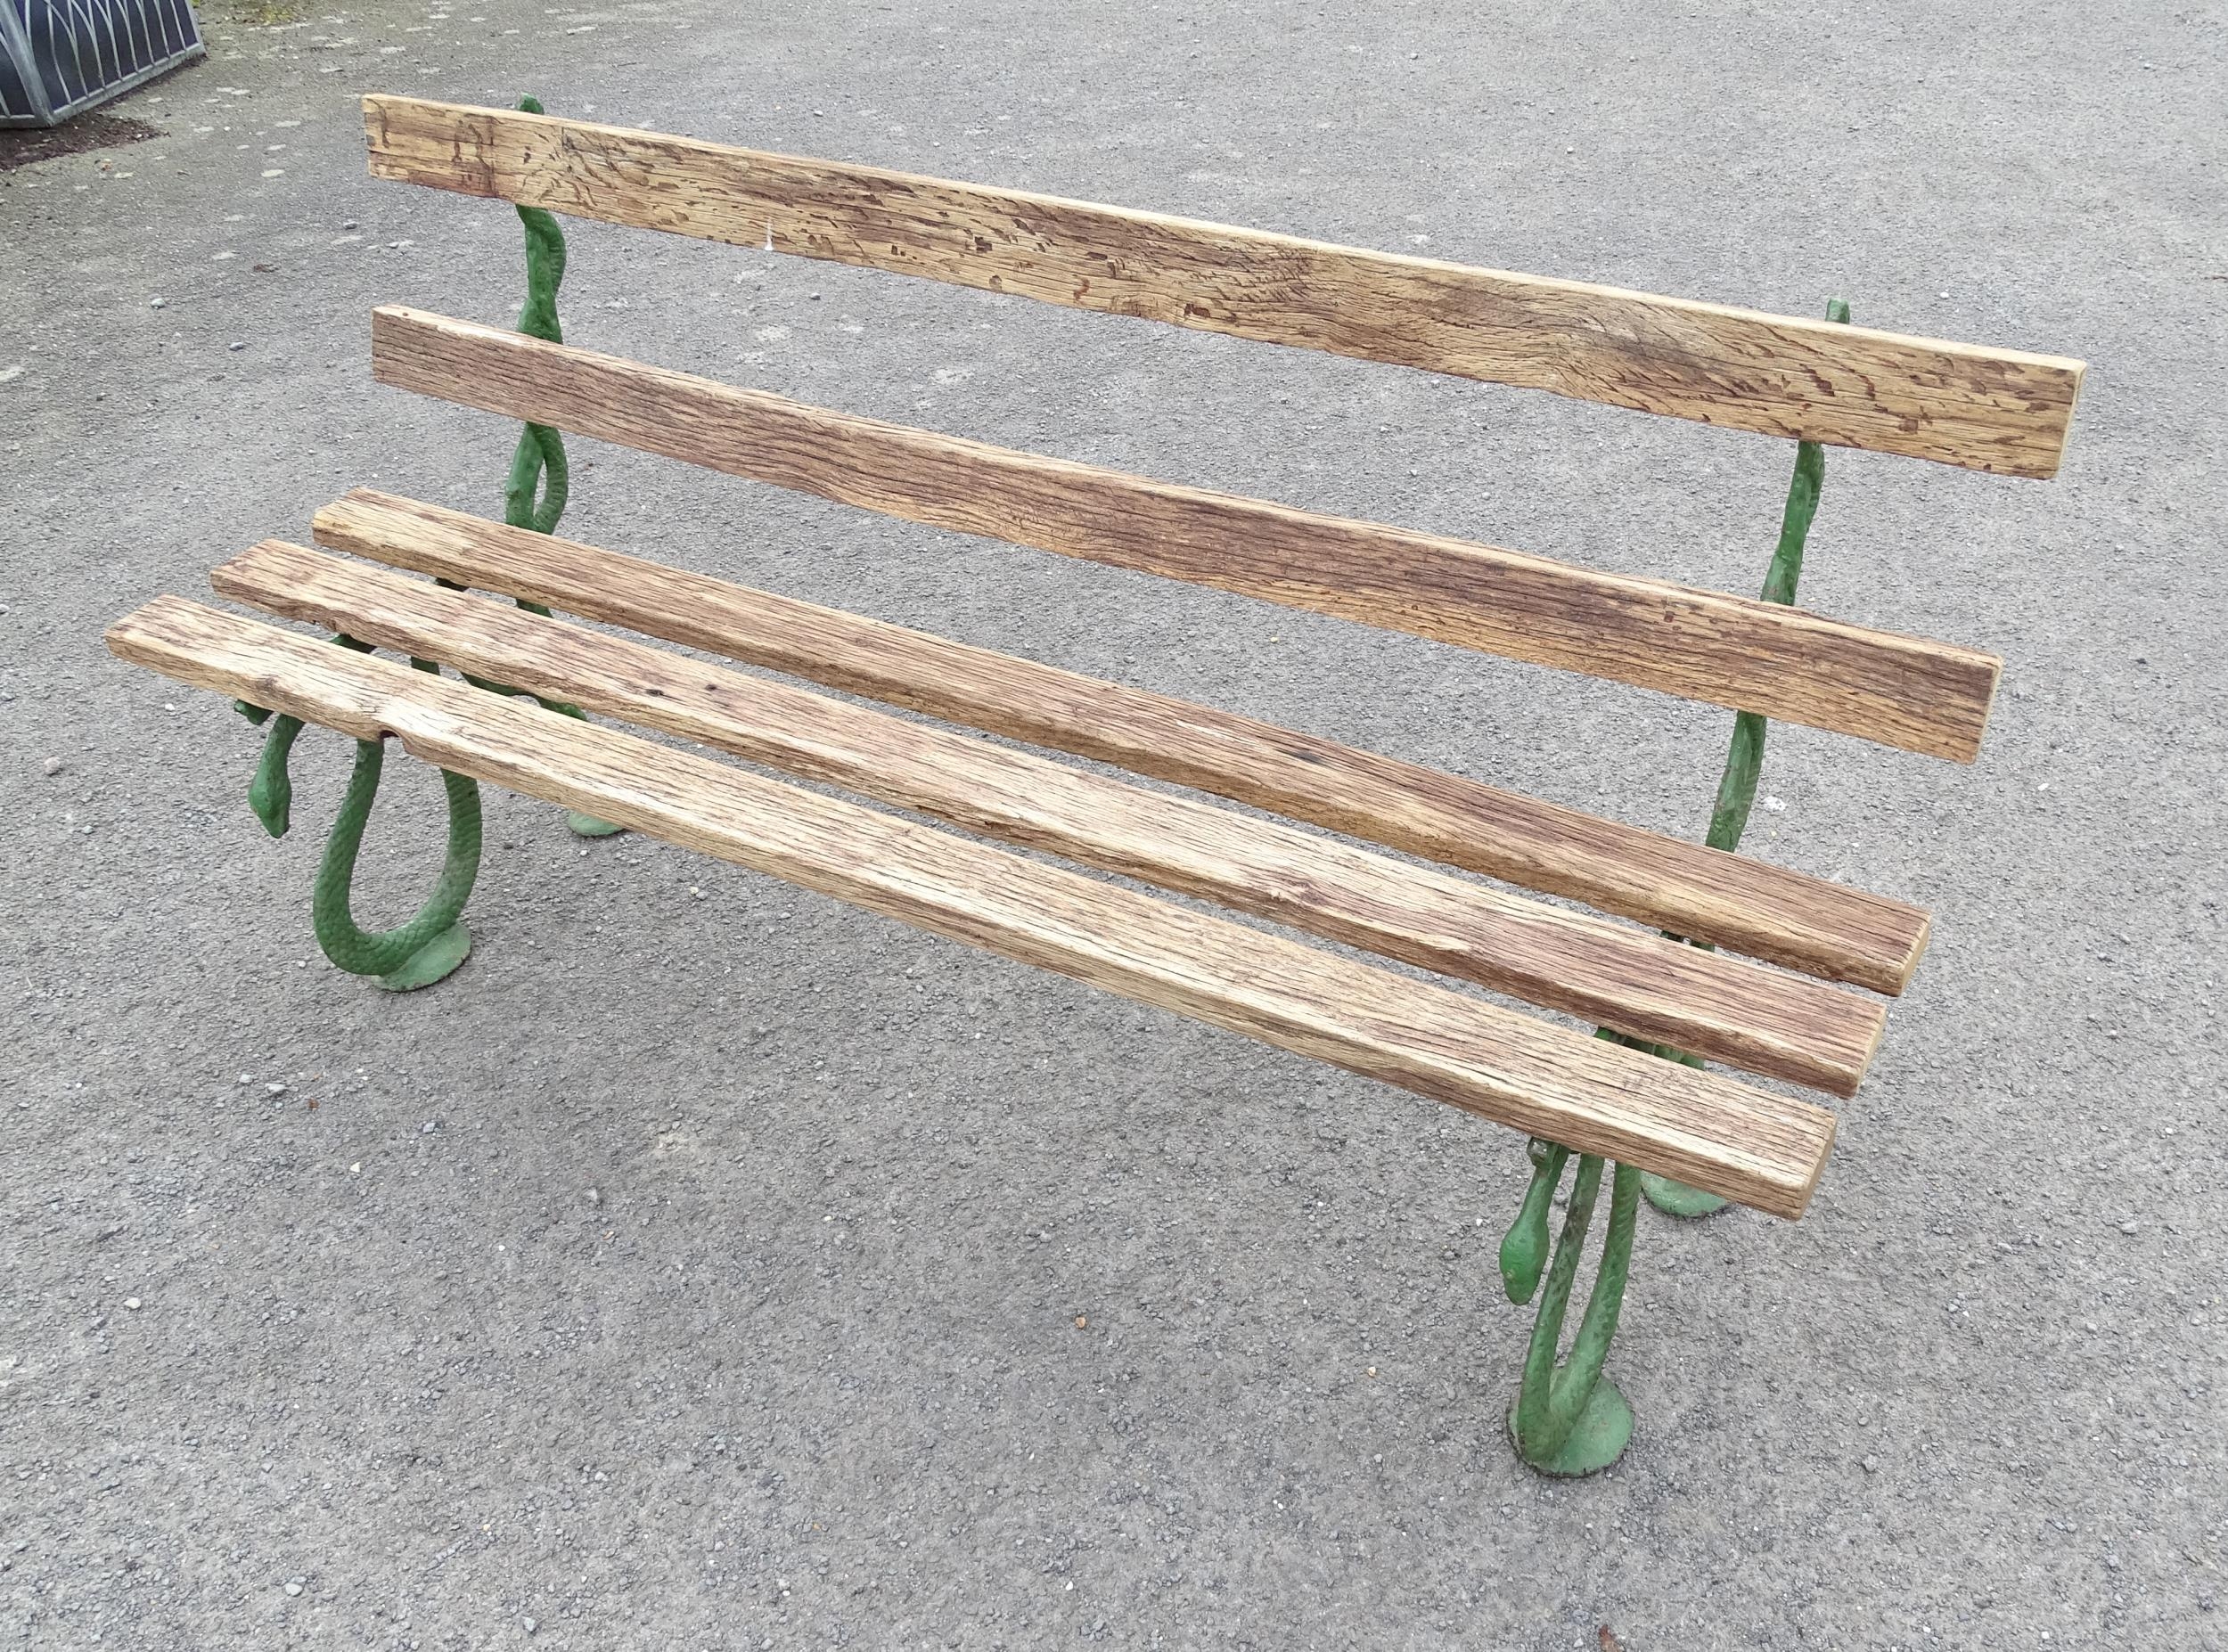 Garden & Architectural : a Coalbrookdale style cast iron and oak slatted garden bench, the